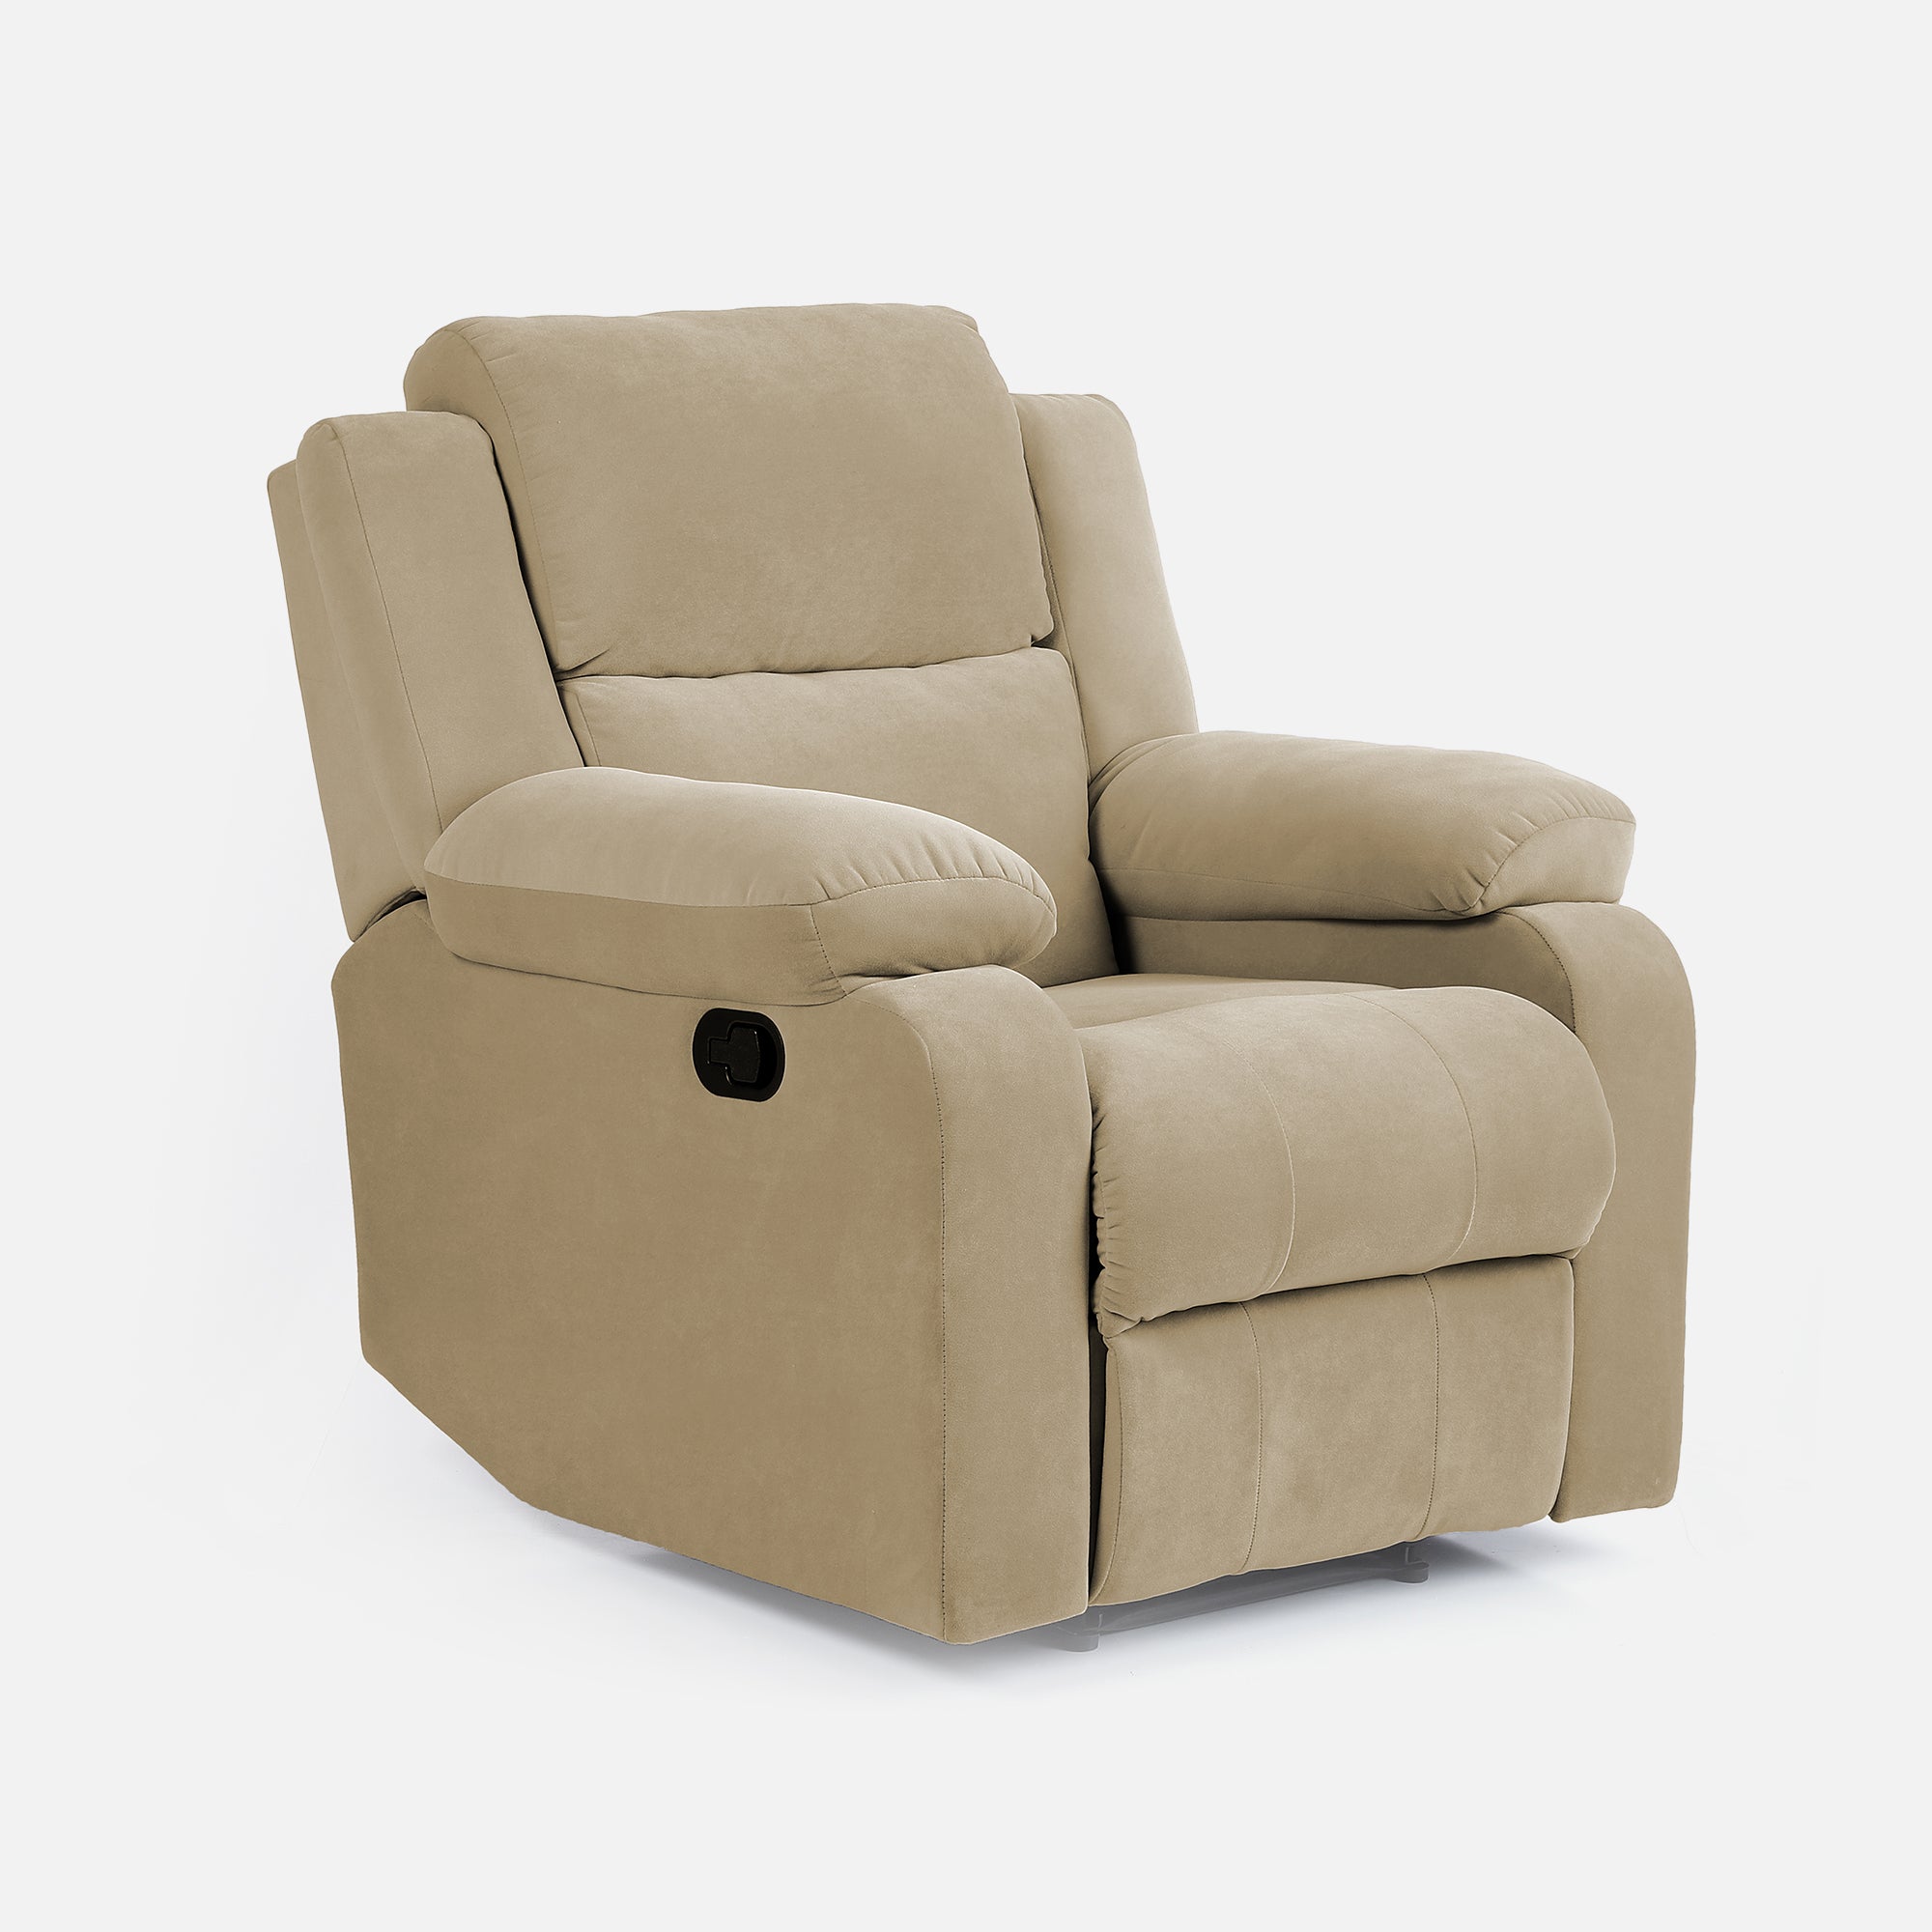 Green Soul Comfy Fabric Single Seater Recliner